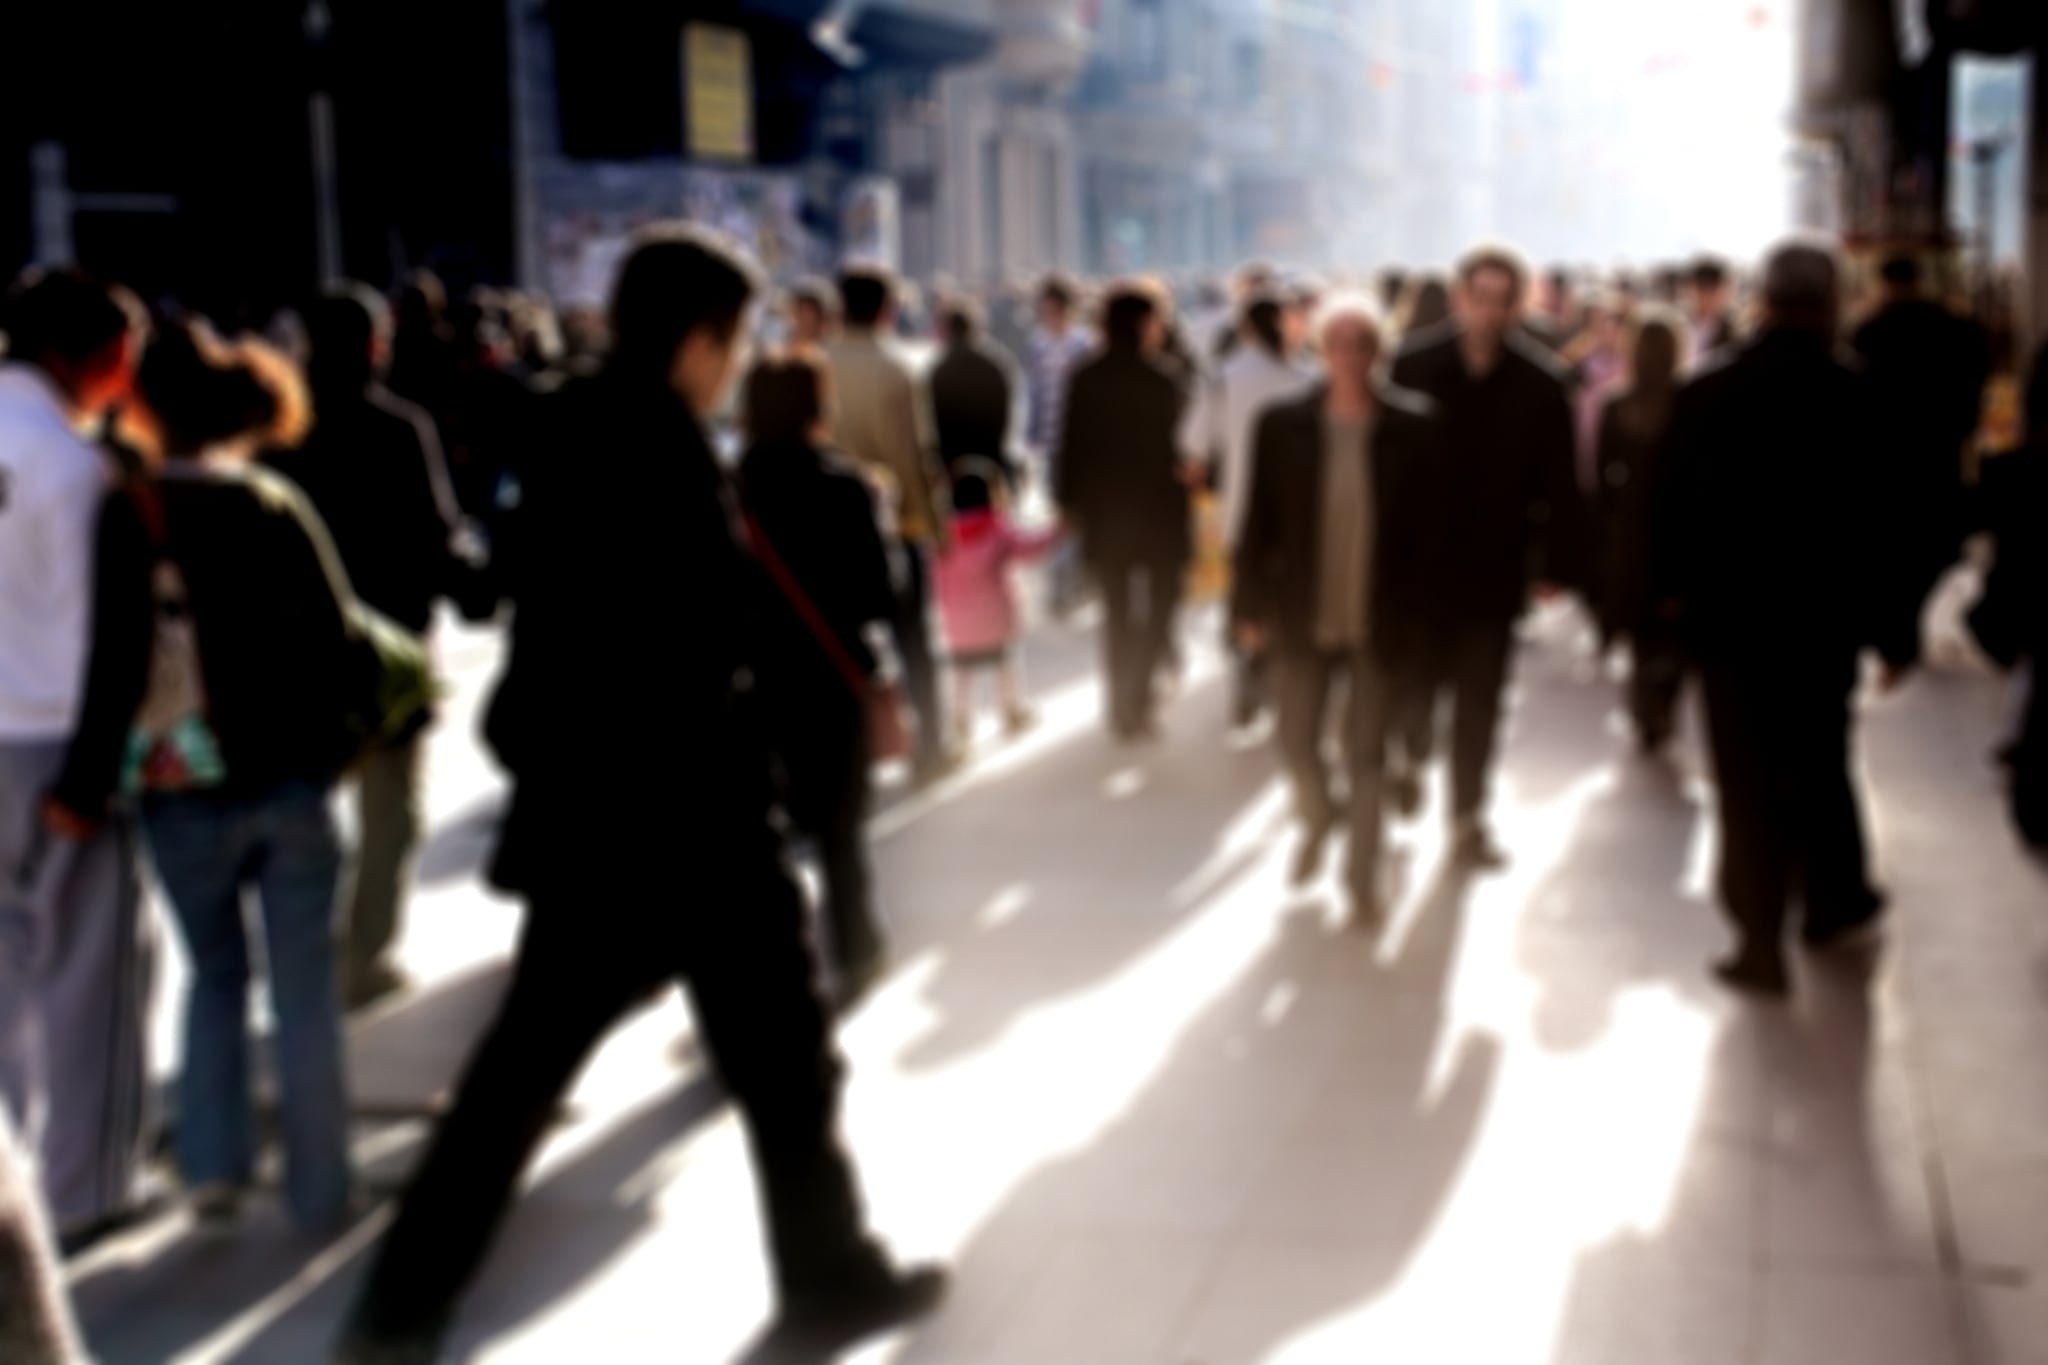 People are walking on a crowded street. The blurry photo implies action or urgency.